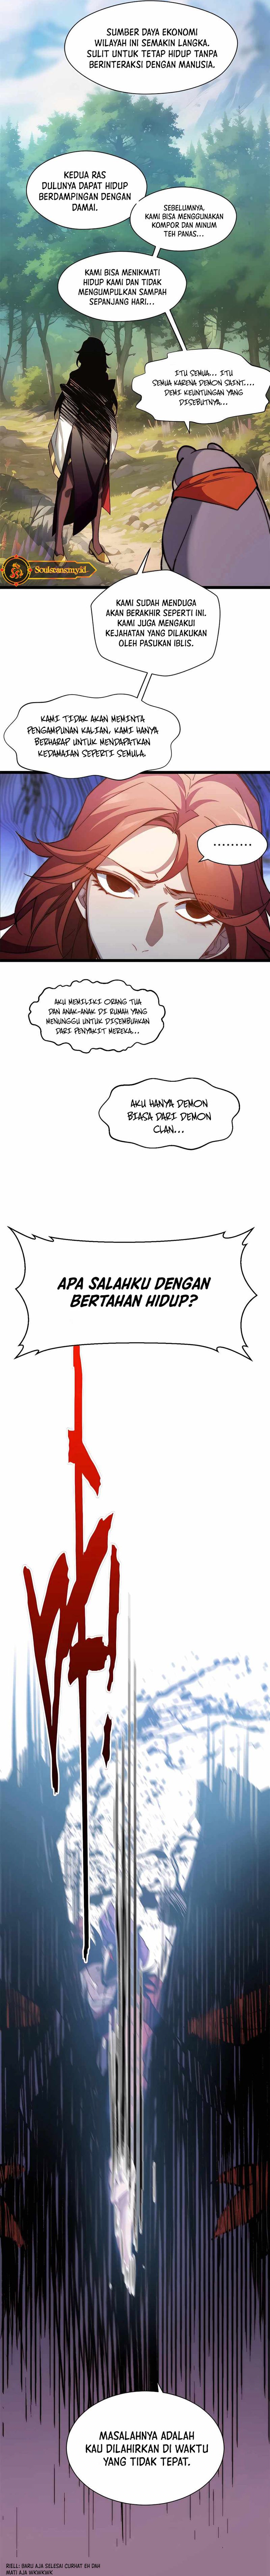 Dilarang COPAS - situs resmi www.mangacanblog.com - Komik top tier providence secretly cultivate for a thousand years 129 - chapter 129 130 Indonesia top tier providence secretly cultivate for a thousand years 129 - chapter 129 Terbaru 3|Baca Manga Komik Indonesia|Mangacan